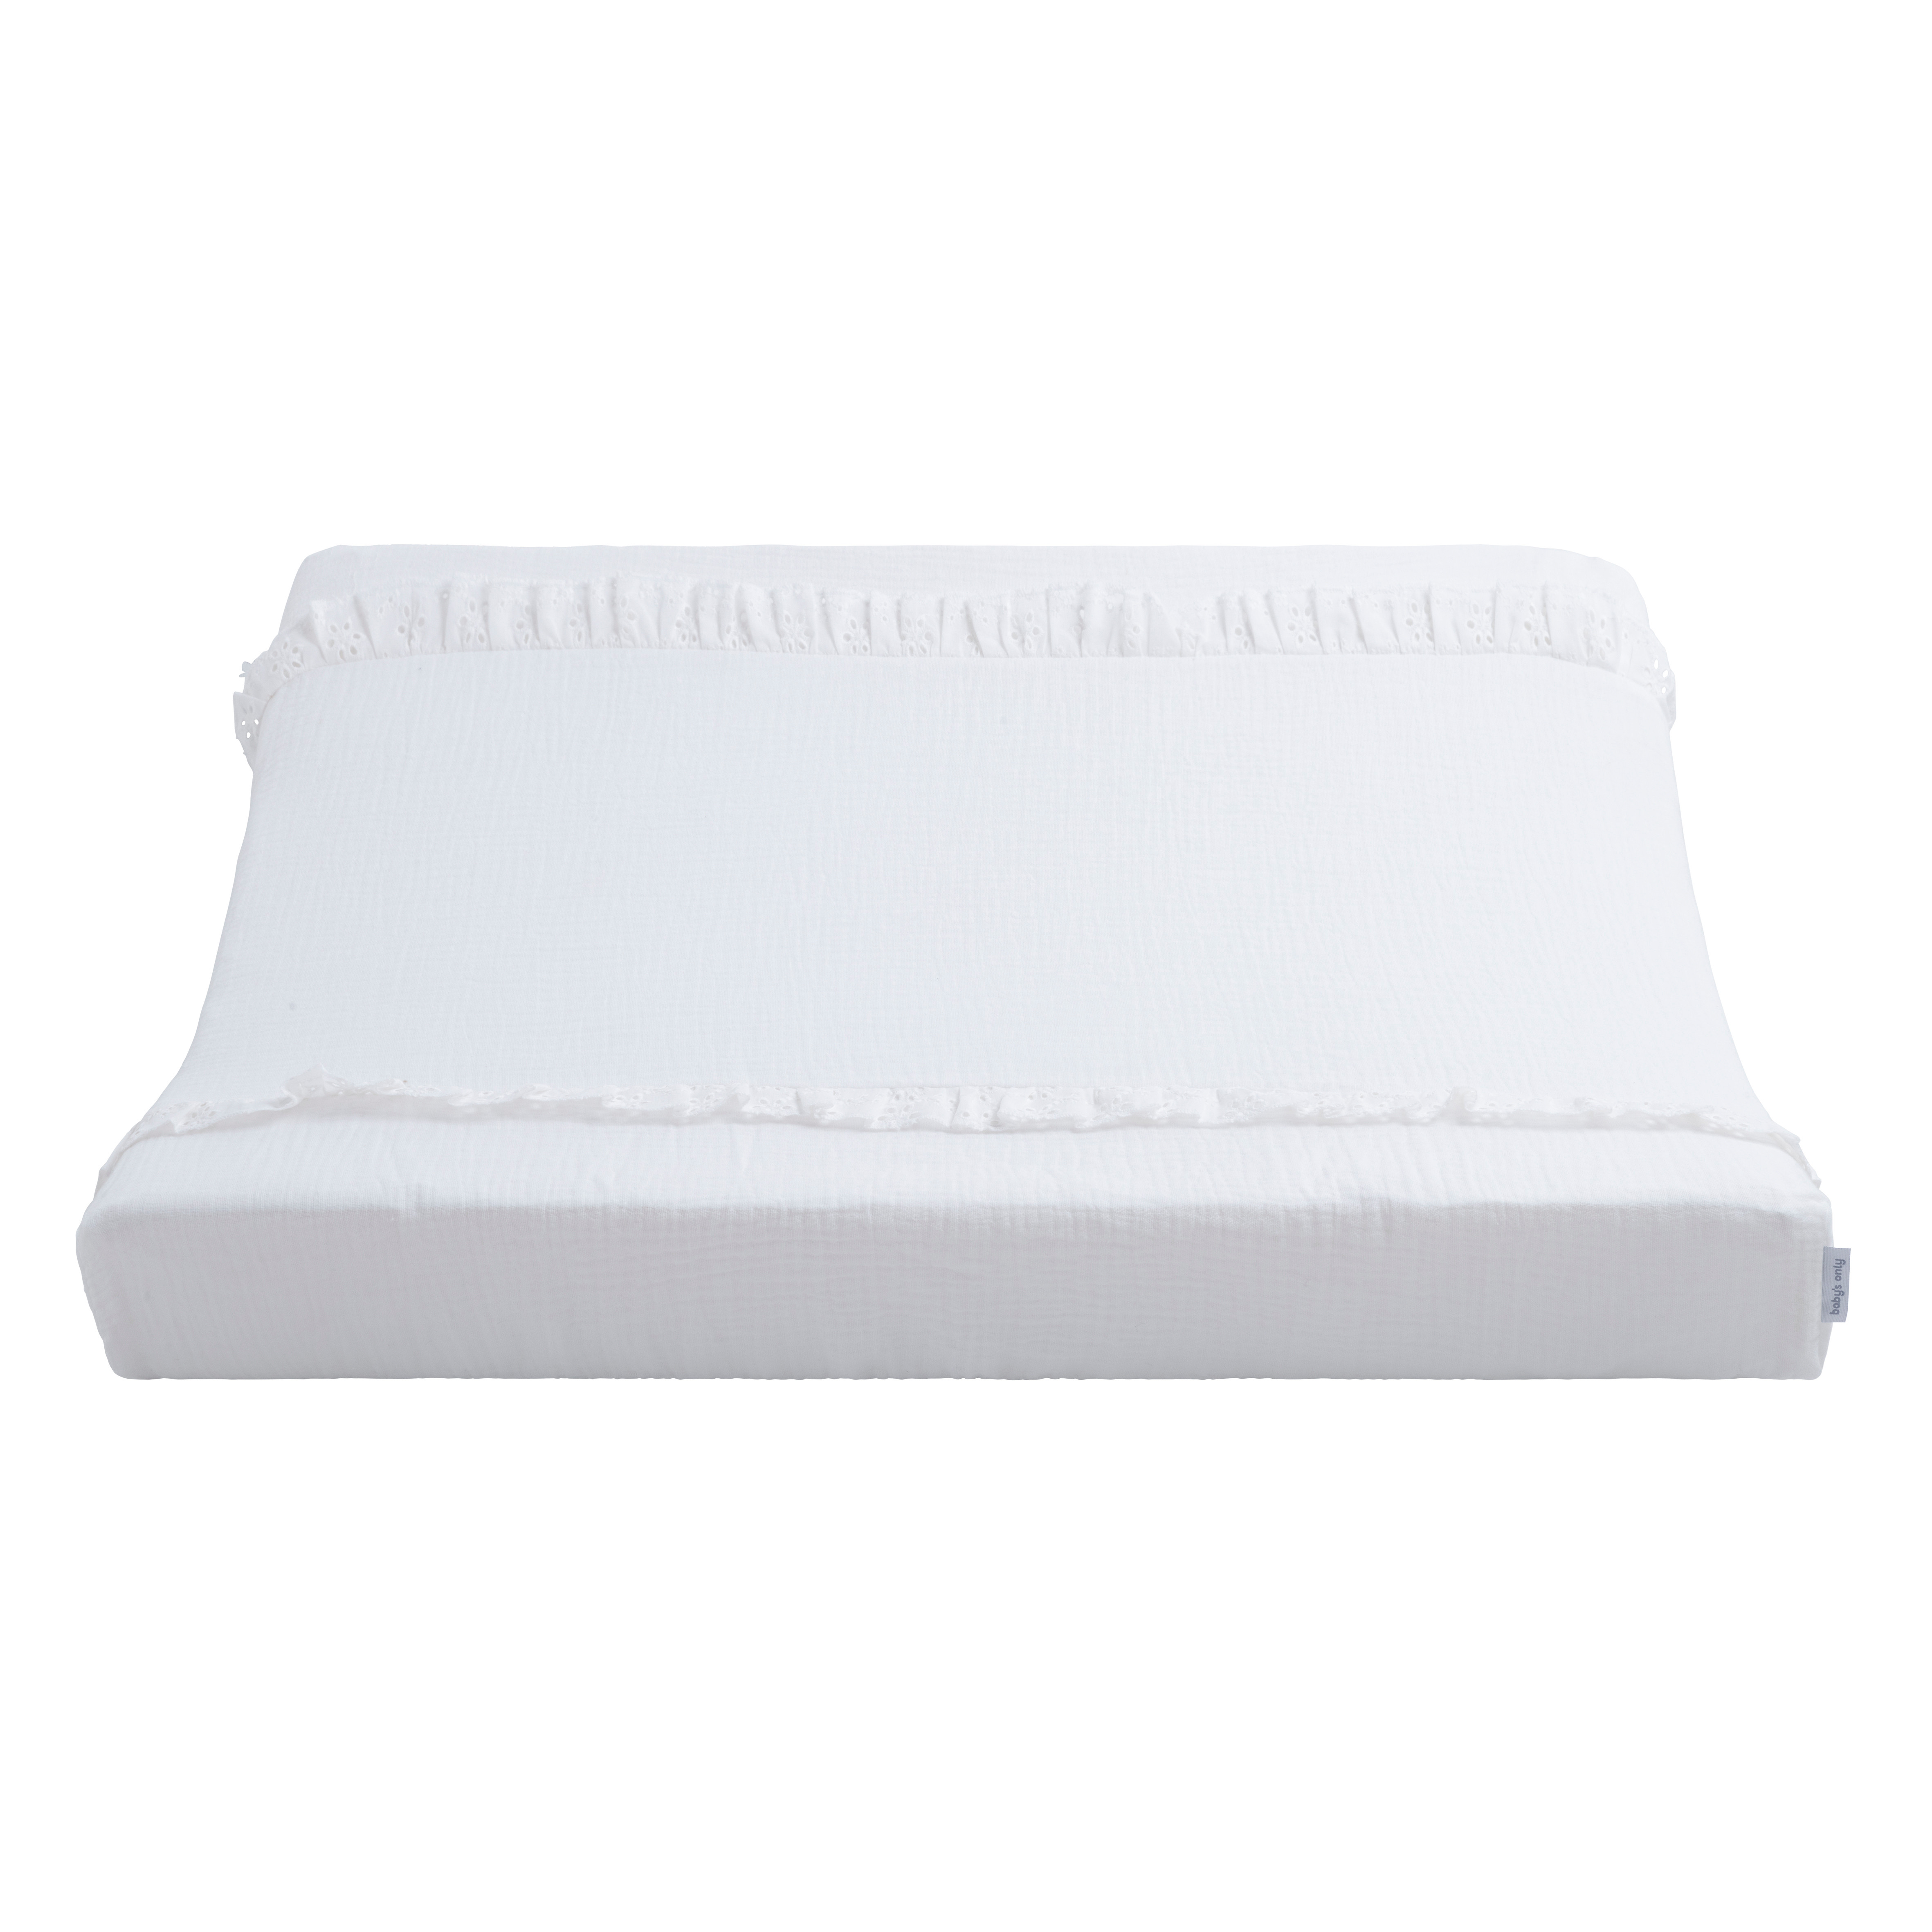 Changing pad cover Calm white - 45x70